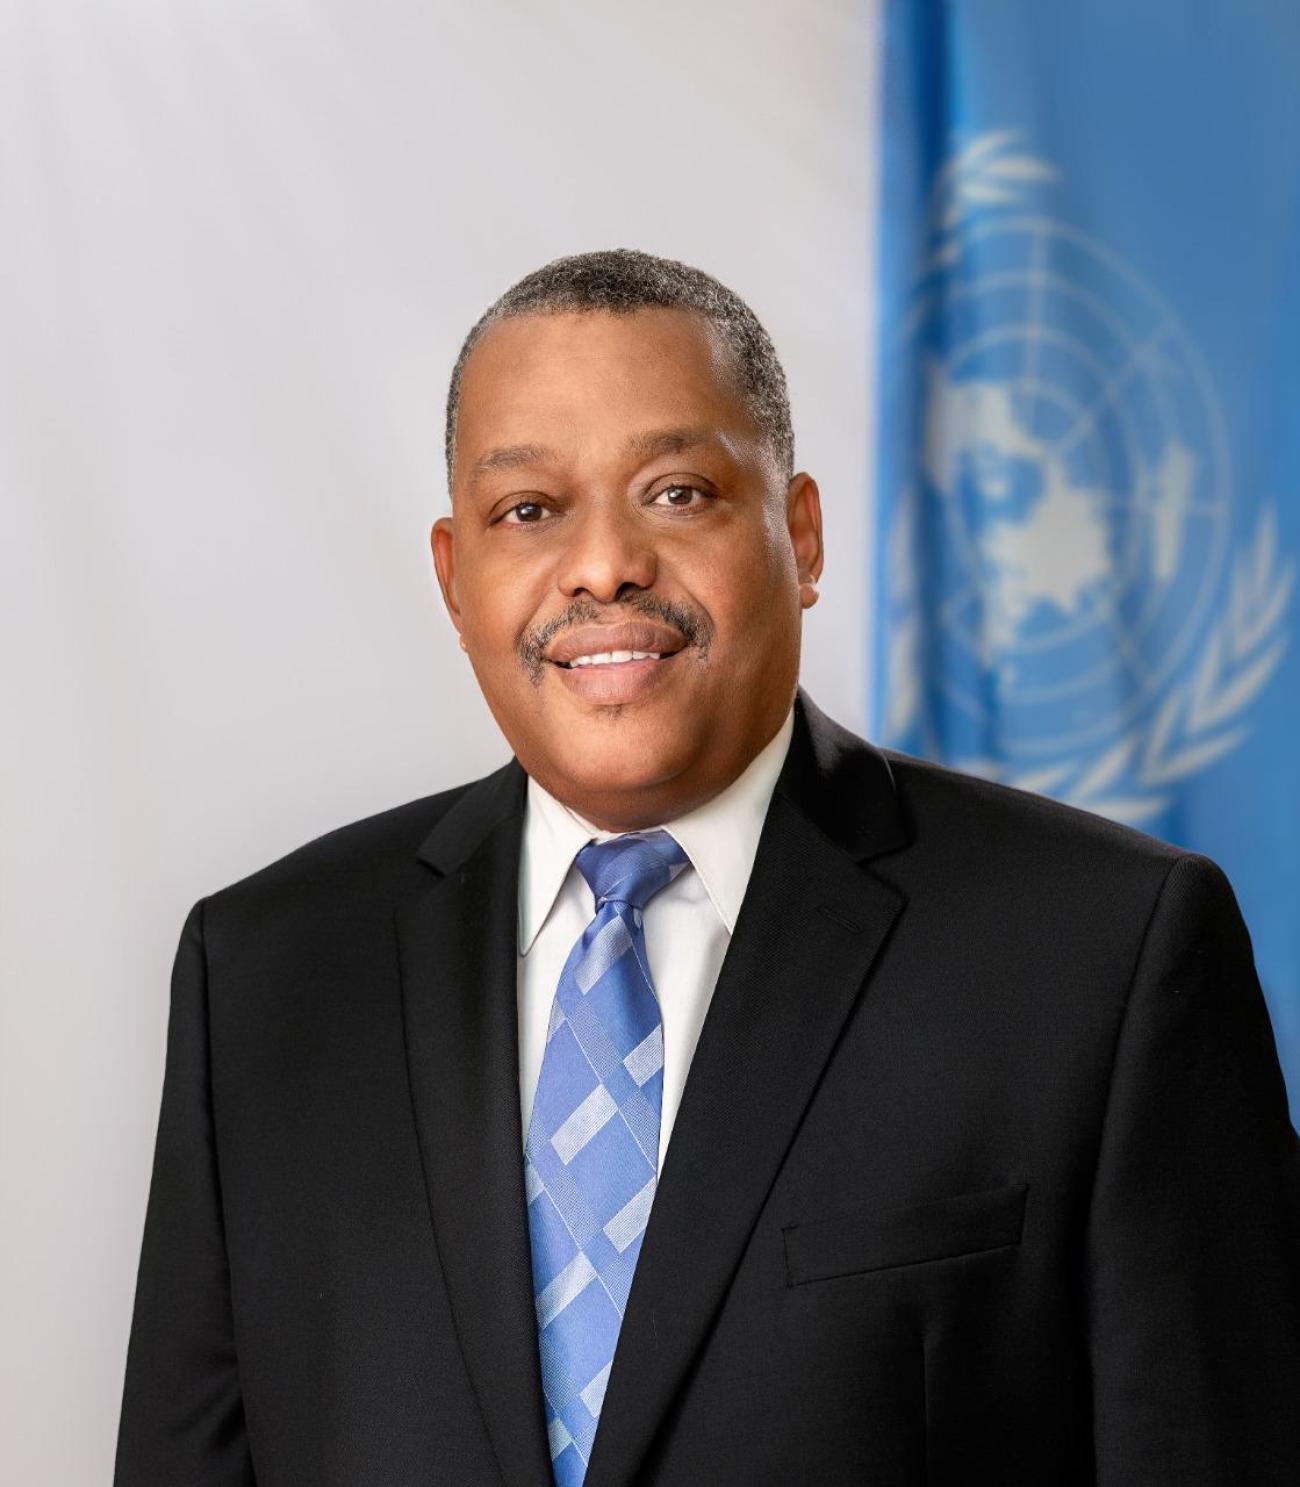 A photo of Resident Coordinator to Jamaica, Garry Conille.